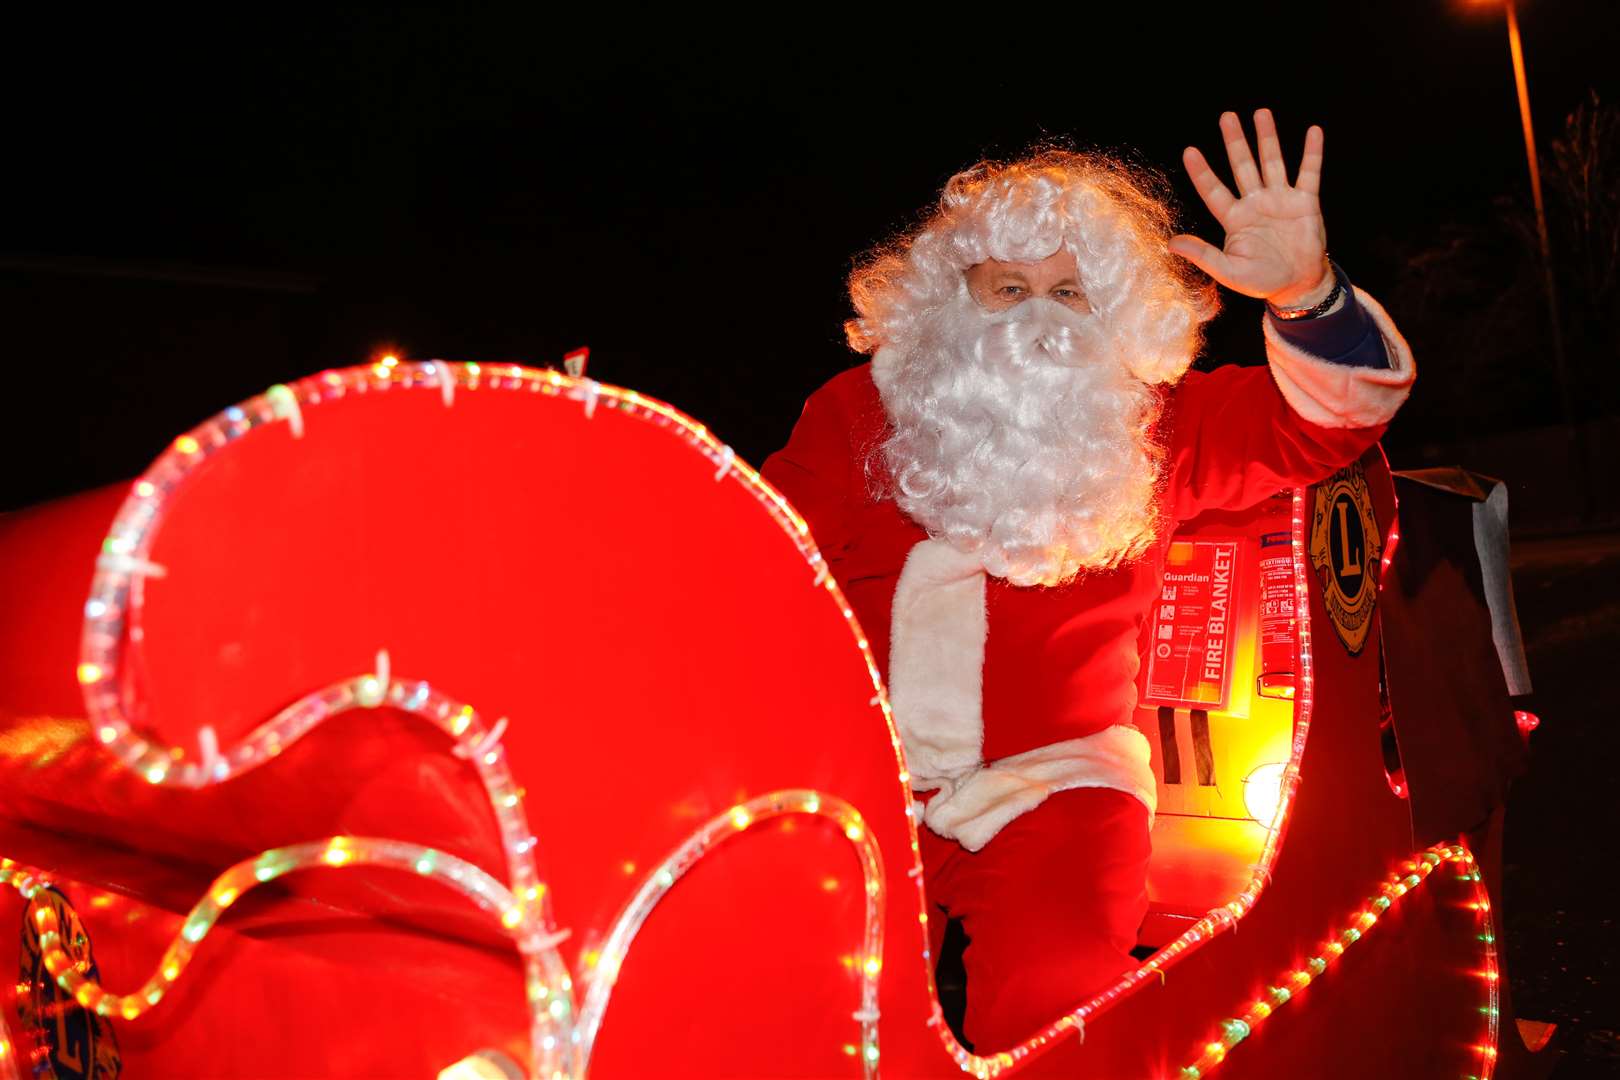 Paddock Wood and District Lions Club's Santa in his sleigh